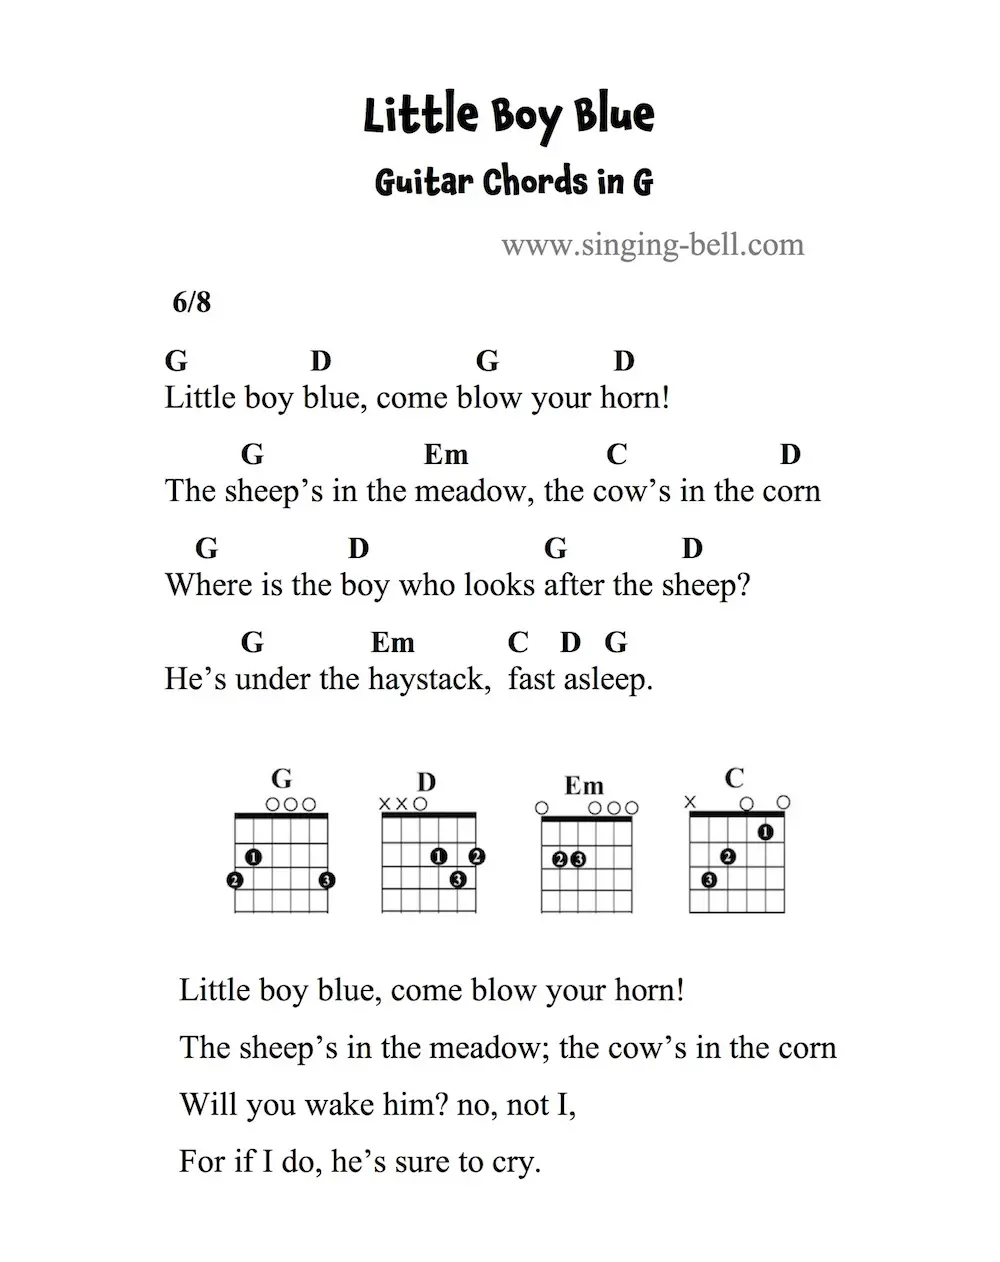 Little Boy Blue - Guitar Chords and Tabs in G.